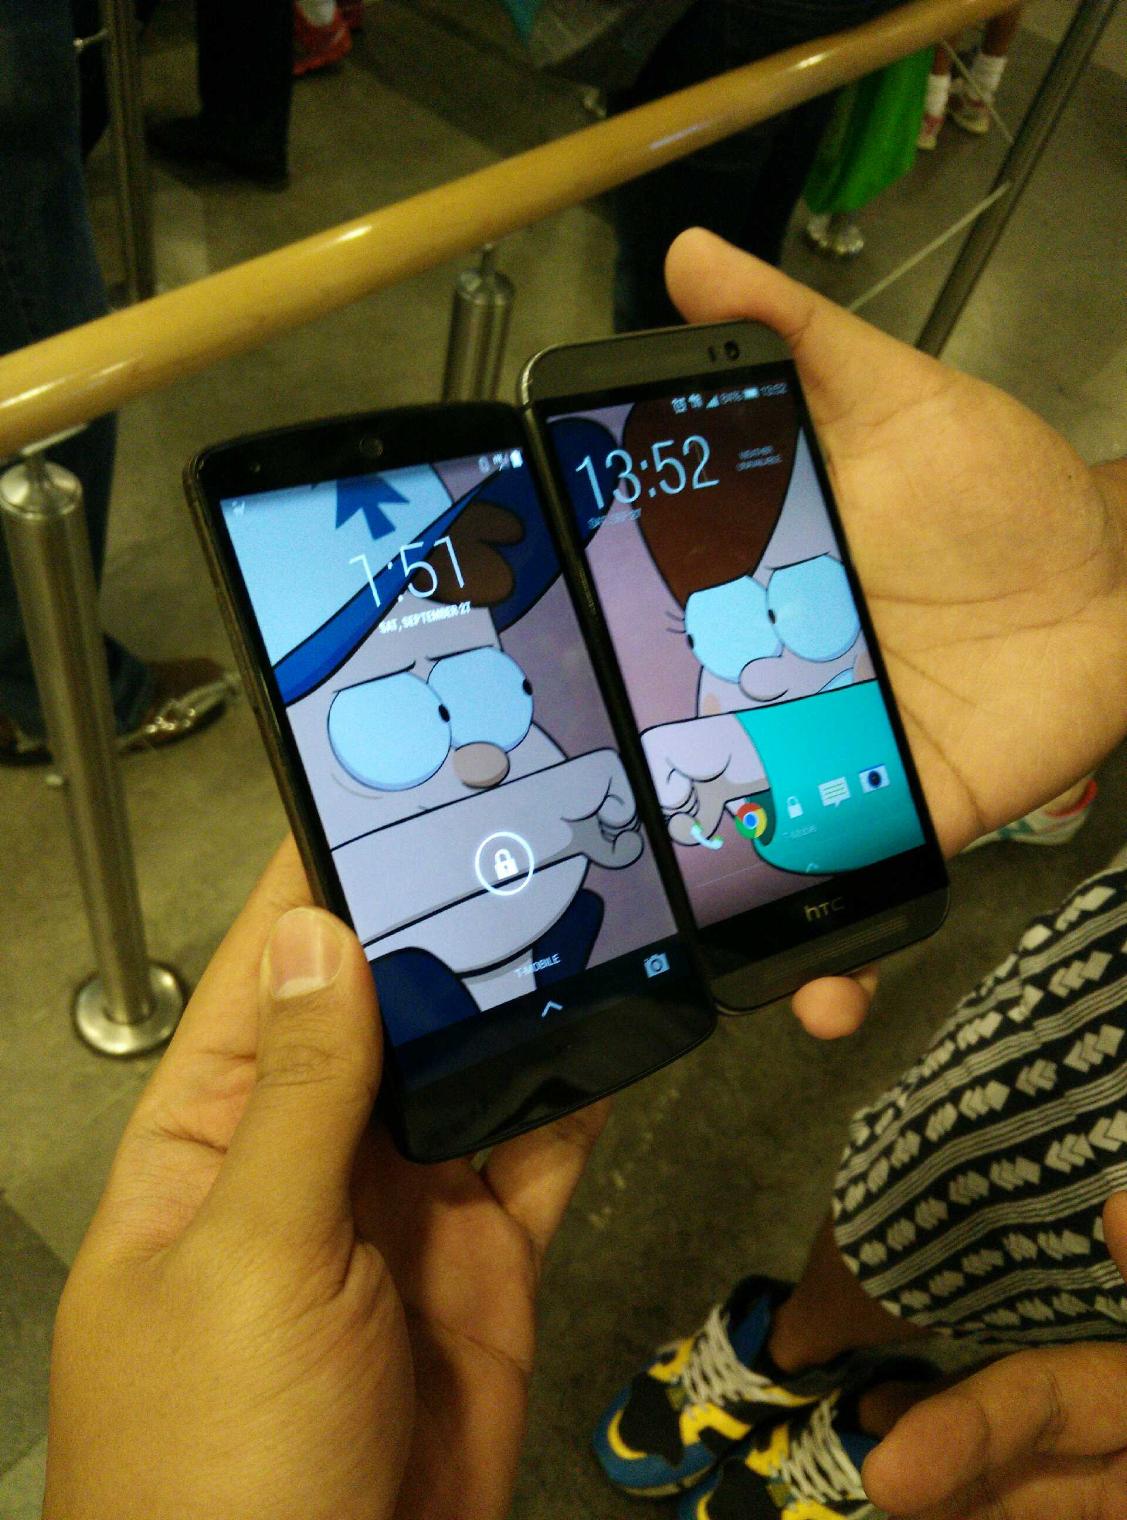 Me and my friend have awesome matching phone wallpapers gravityfalls